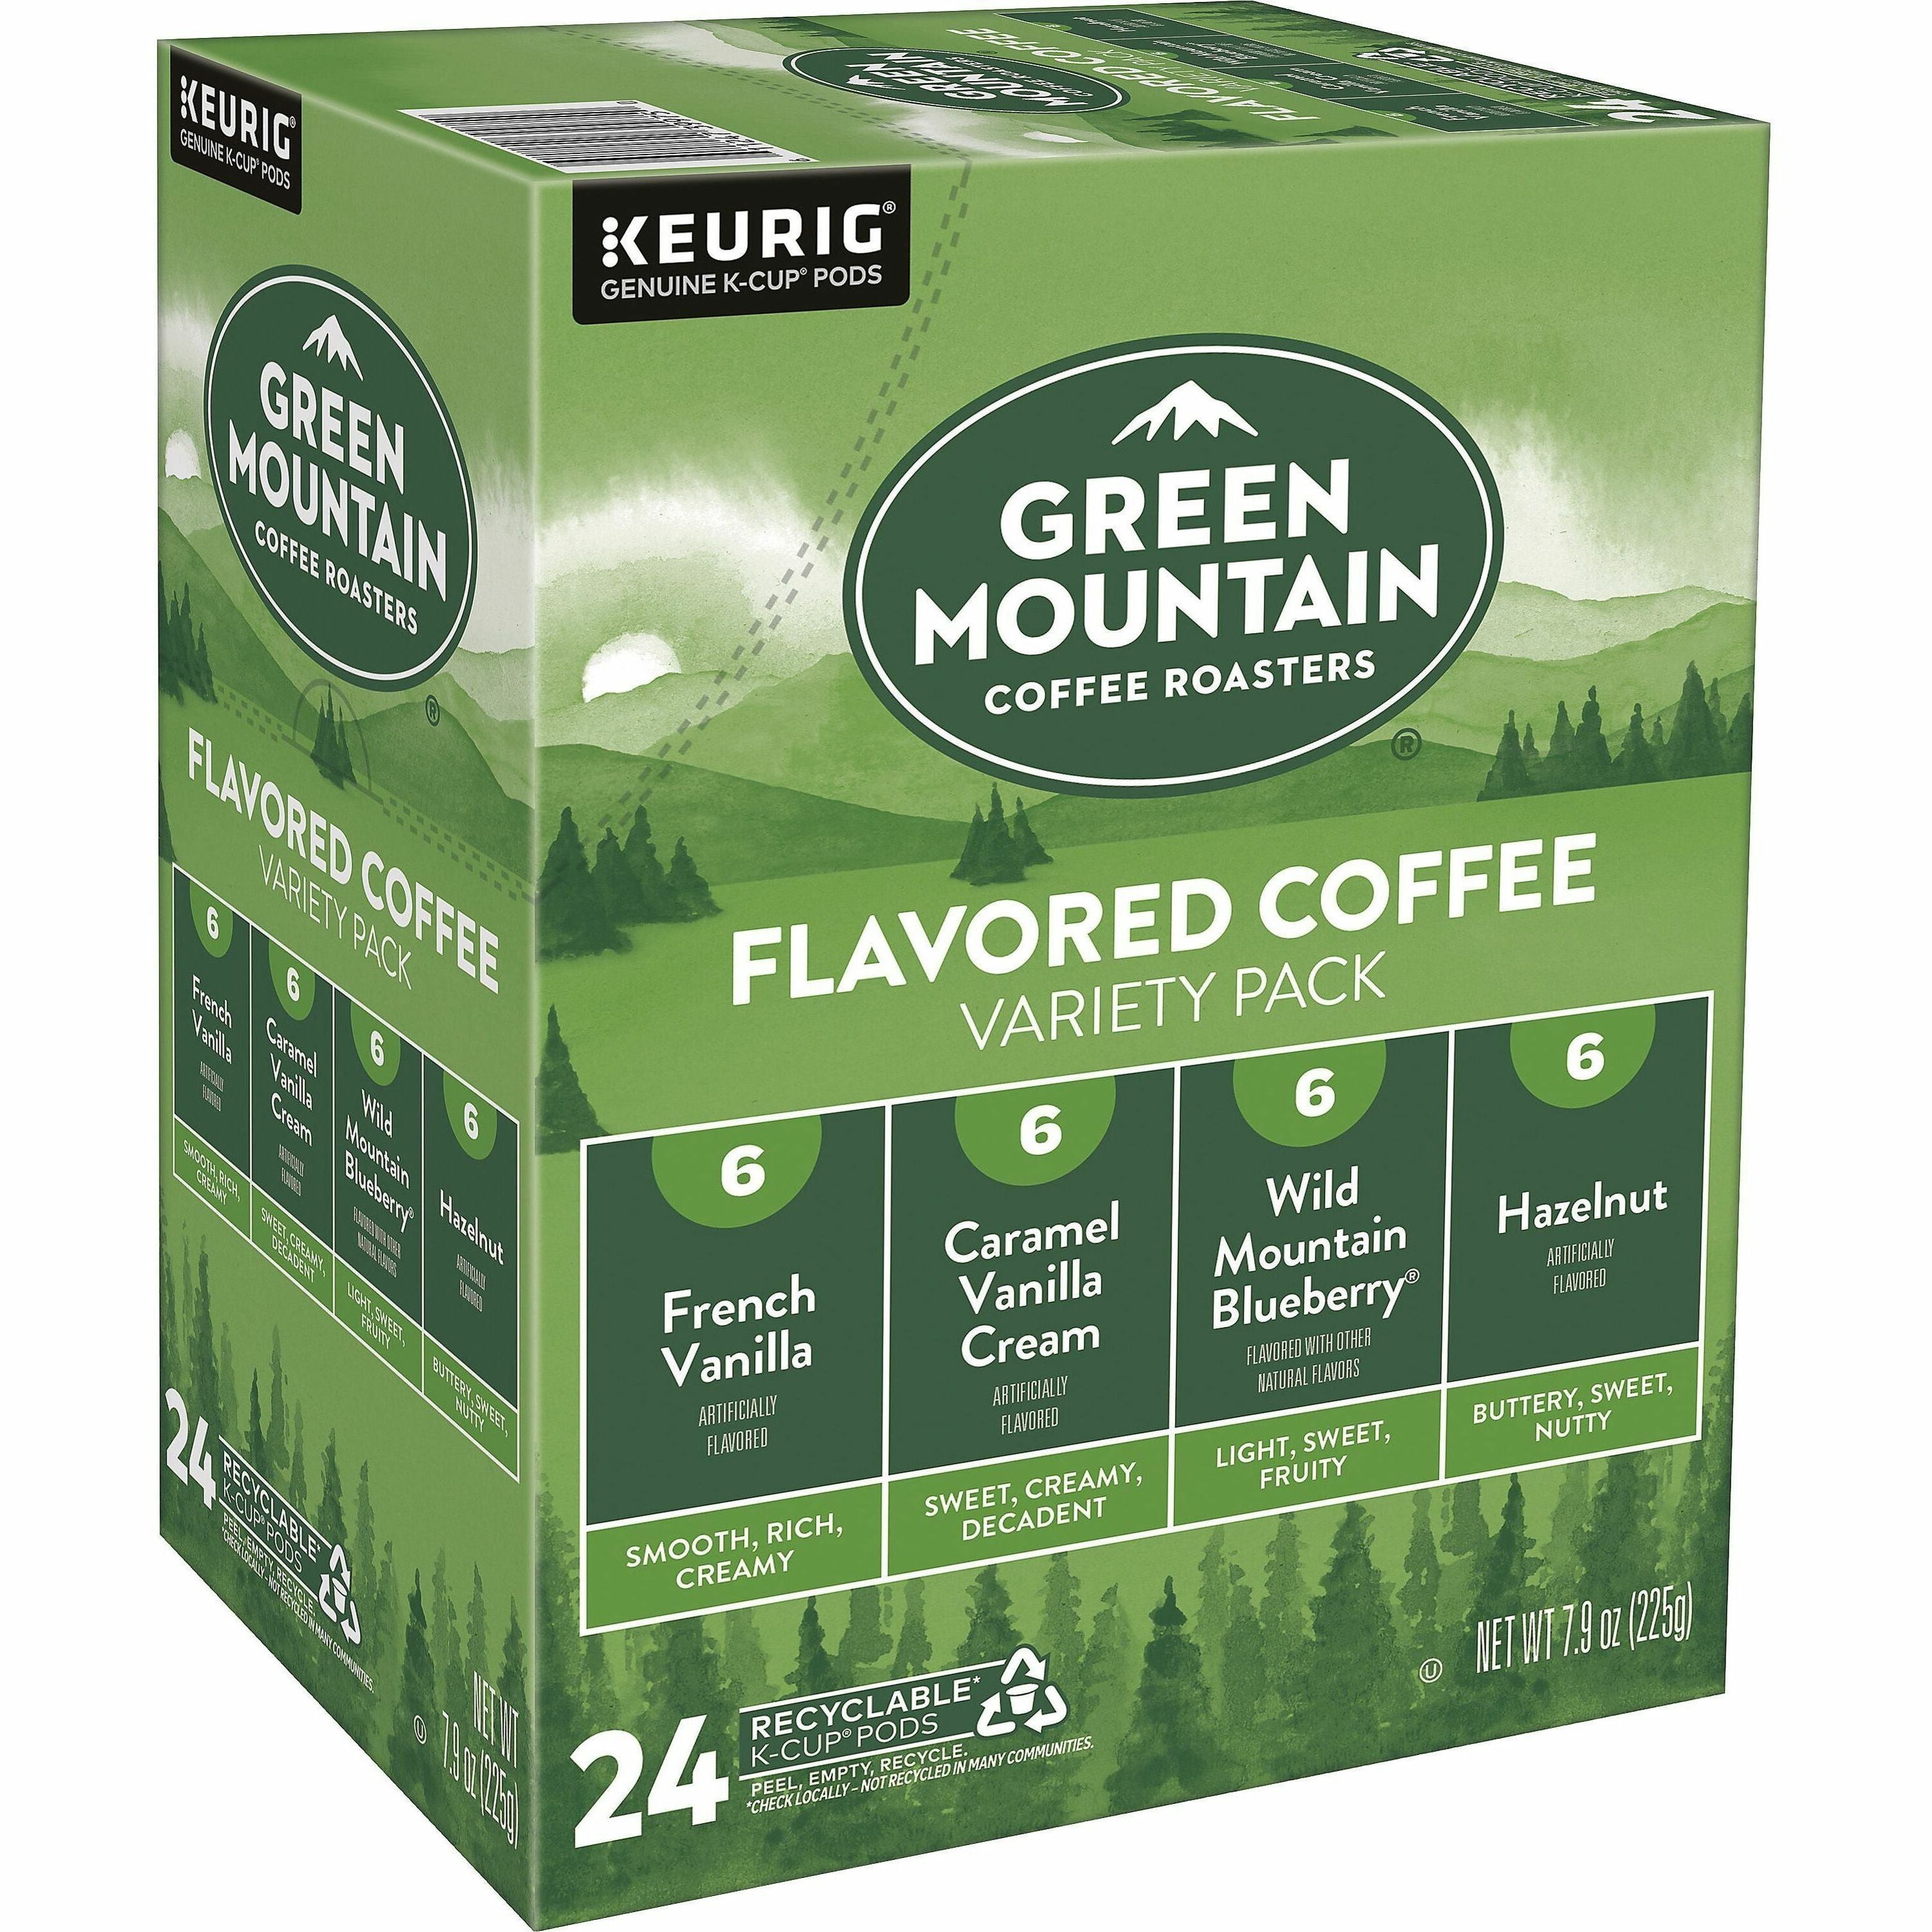 green-mountain-coffee-k-cup-variety-sampler-coffee-pack-compatible-with-keurig-k-cup-brewer-light-24-k-cup-4-carton_gmt9975ct - 1